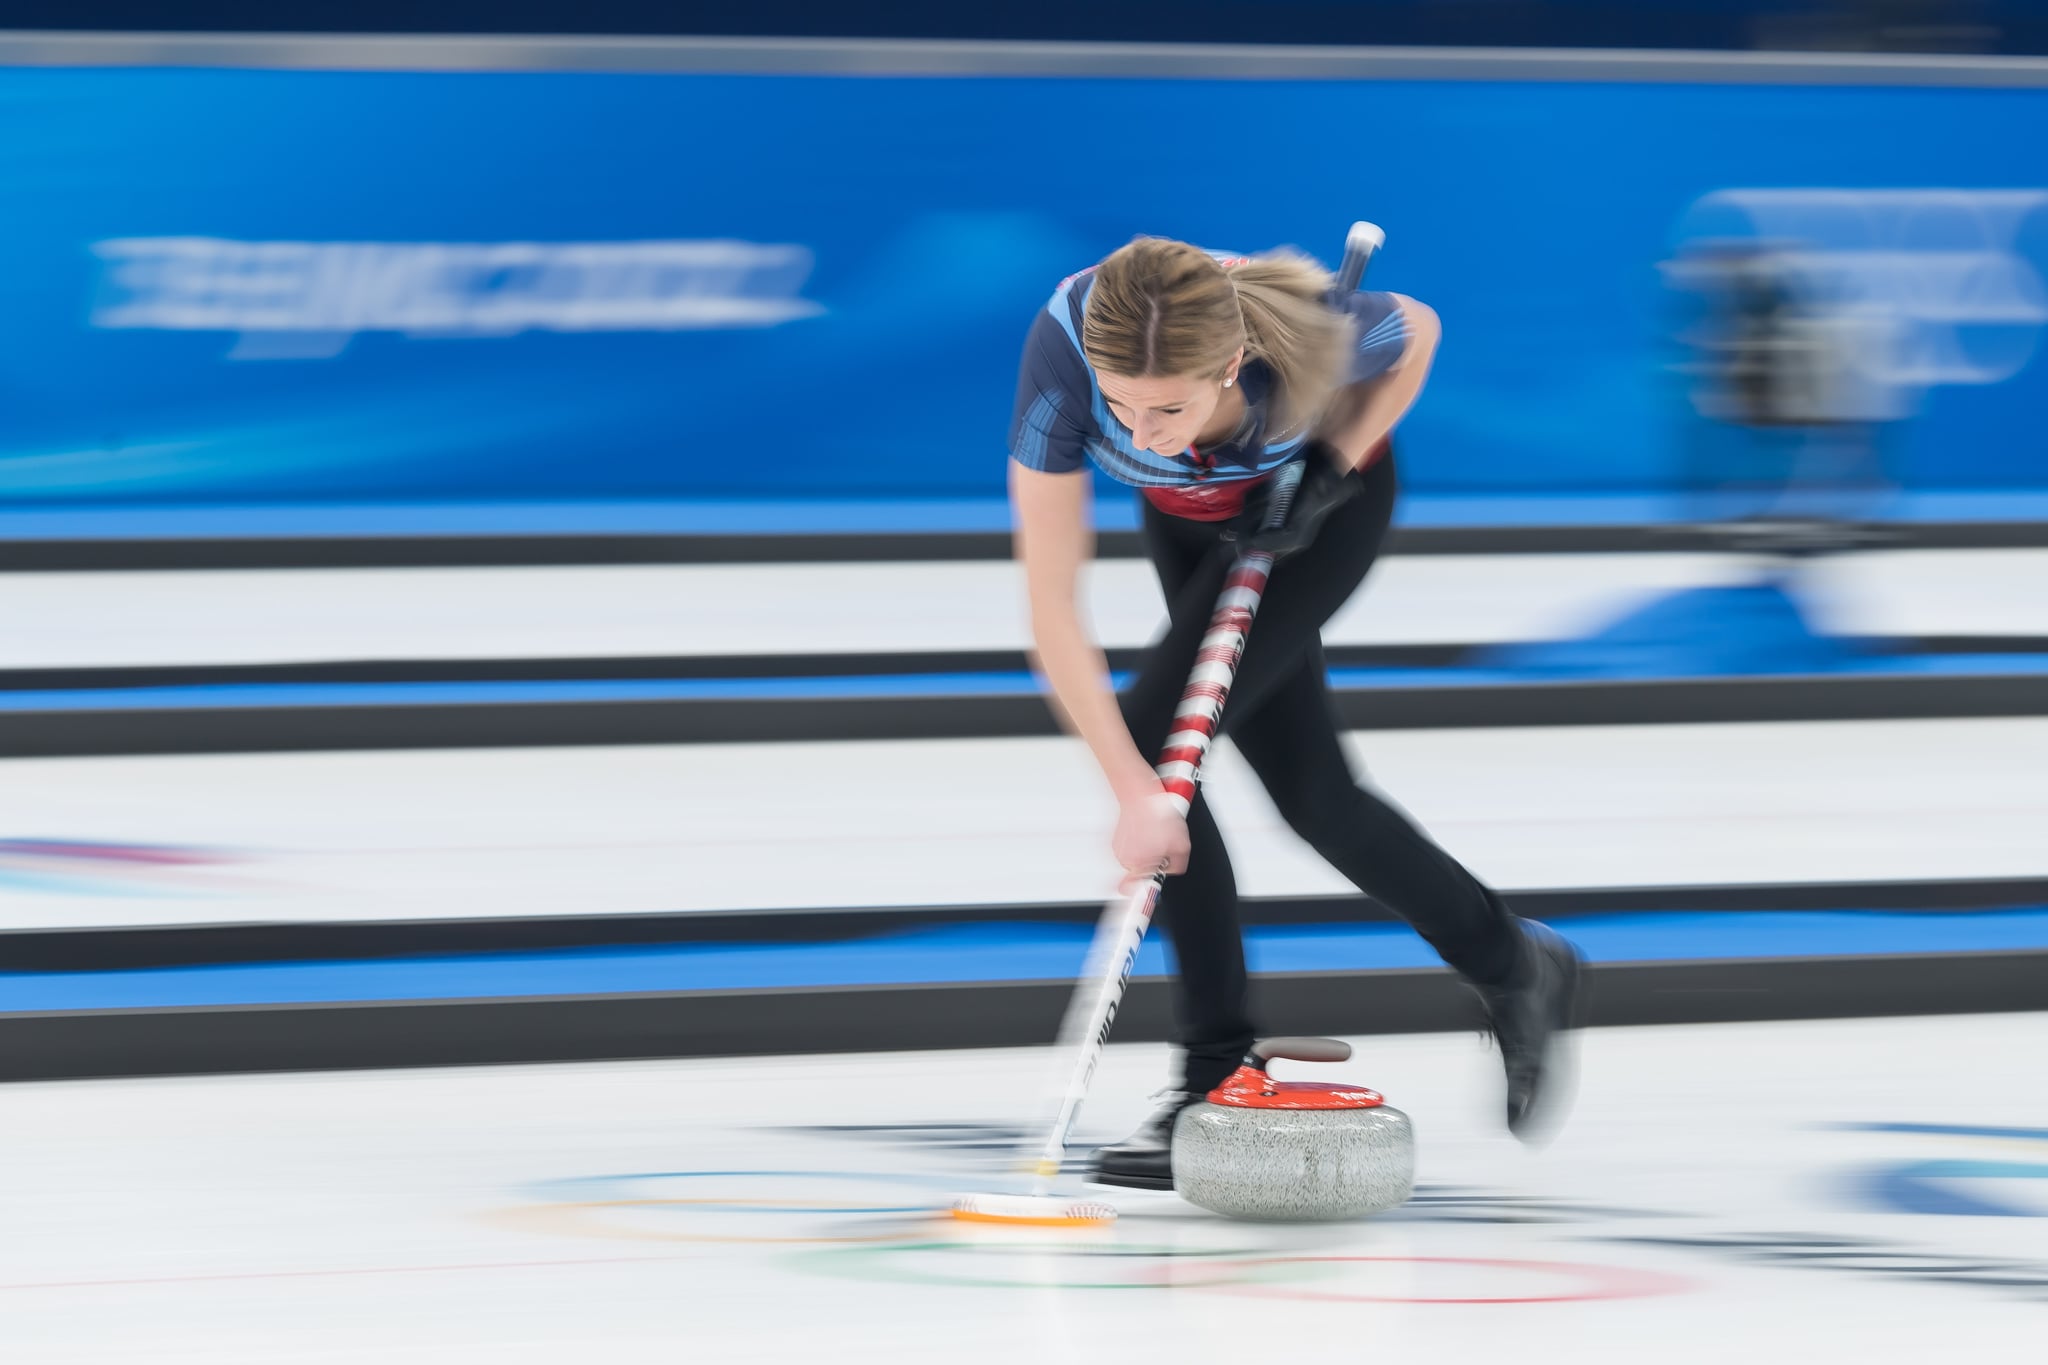 BEIJING, CHINA - FEBRUARY 03: Vicky Persinger of USA in action at Curling Mixed Doubles during the Beijing 2022 Winter Olympics at National Aquatics Centre on February 3, 2022 in Beijing, China. (Photo by Mario Hommes/DeFodi Images via Getty Images)